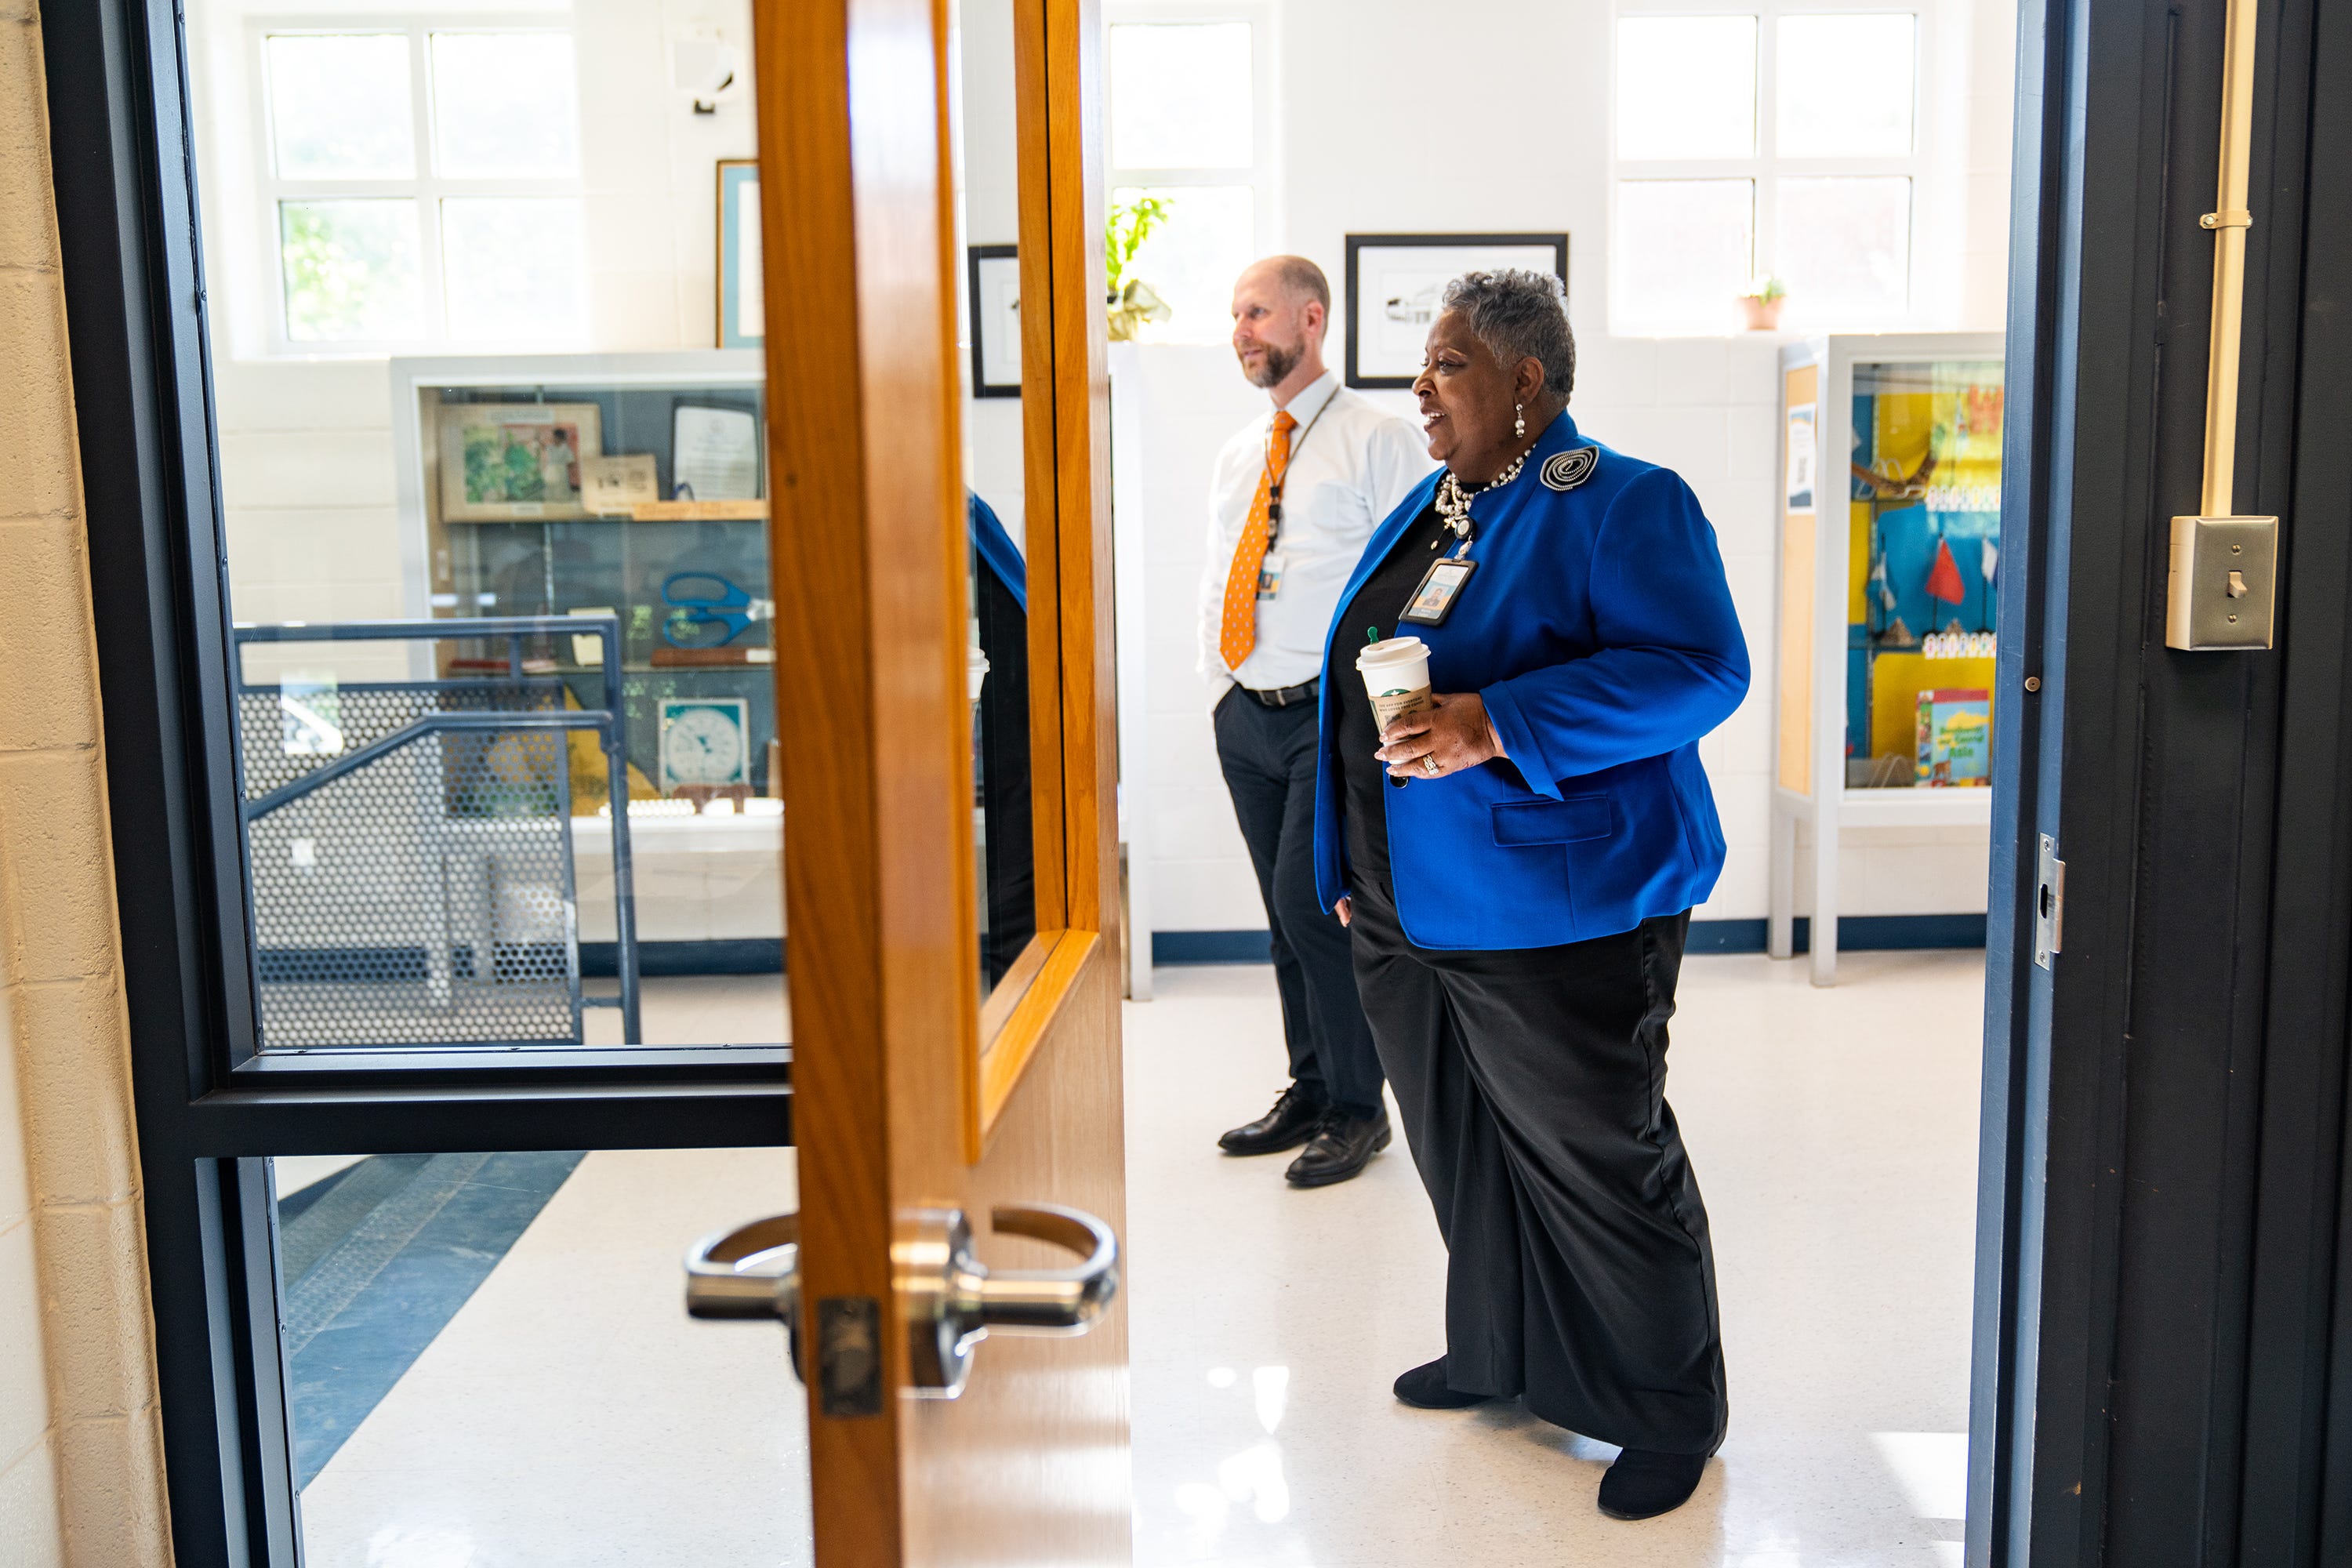 Sleepy Hollow Elementary School Principal Mattie Fallen and Assistant Principal Timothy Scesney stand in the hallway.